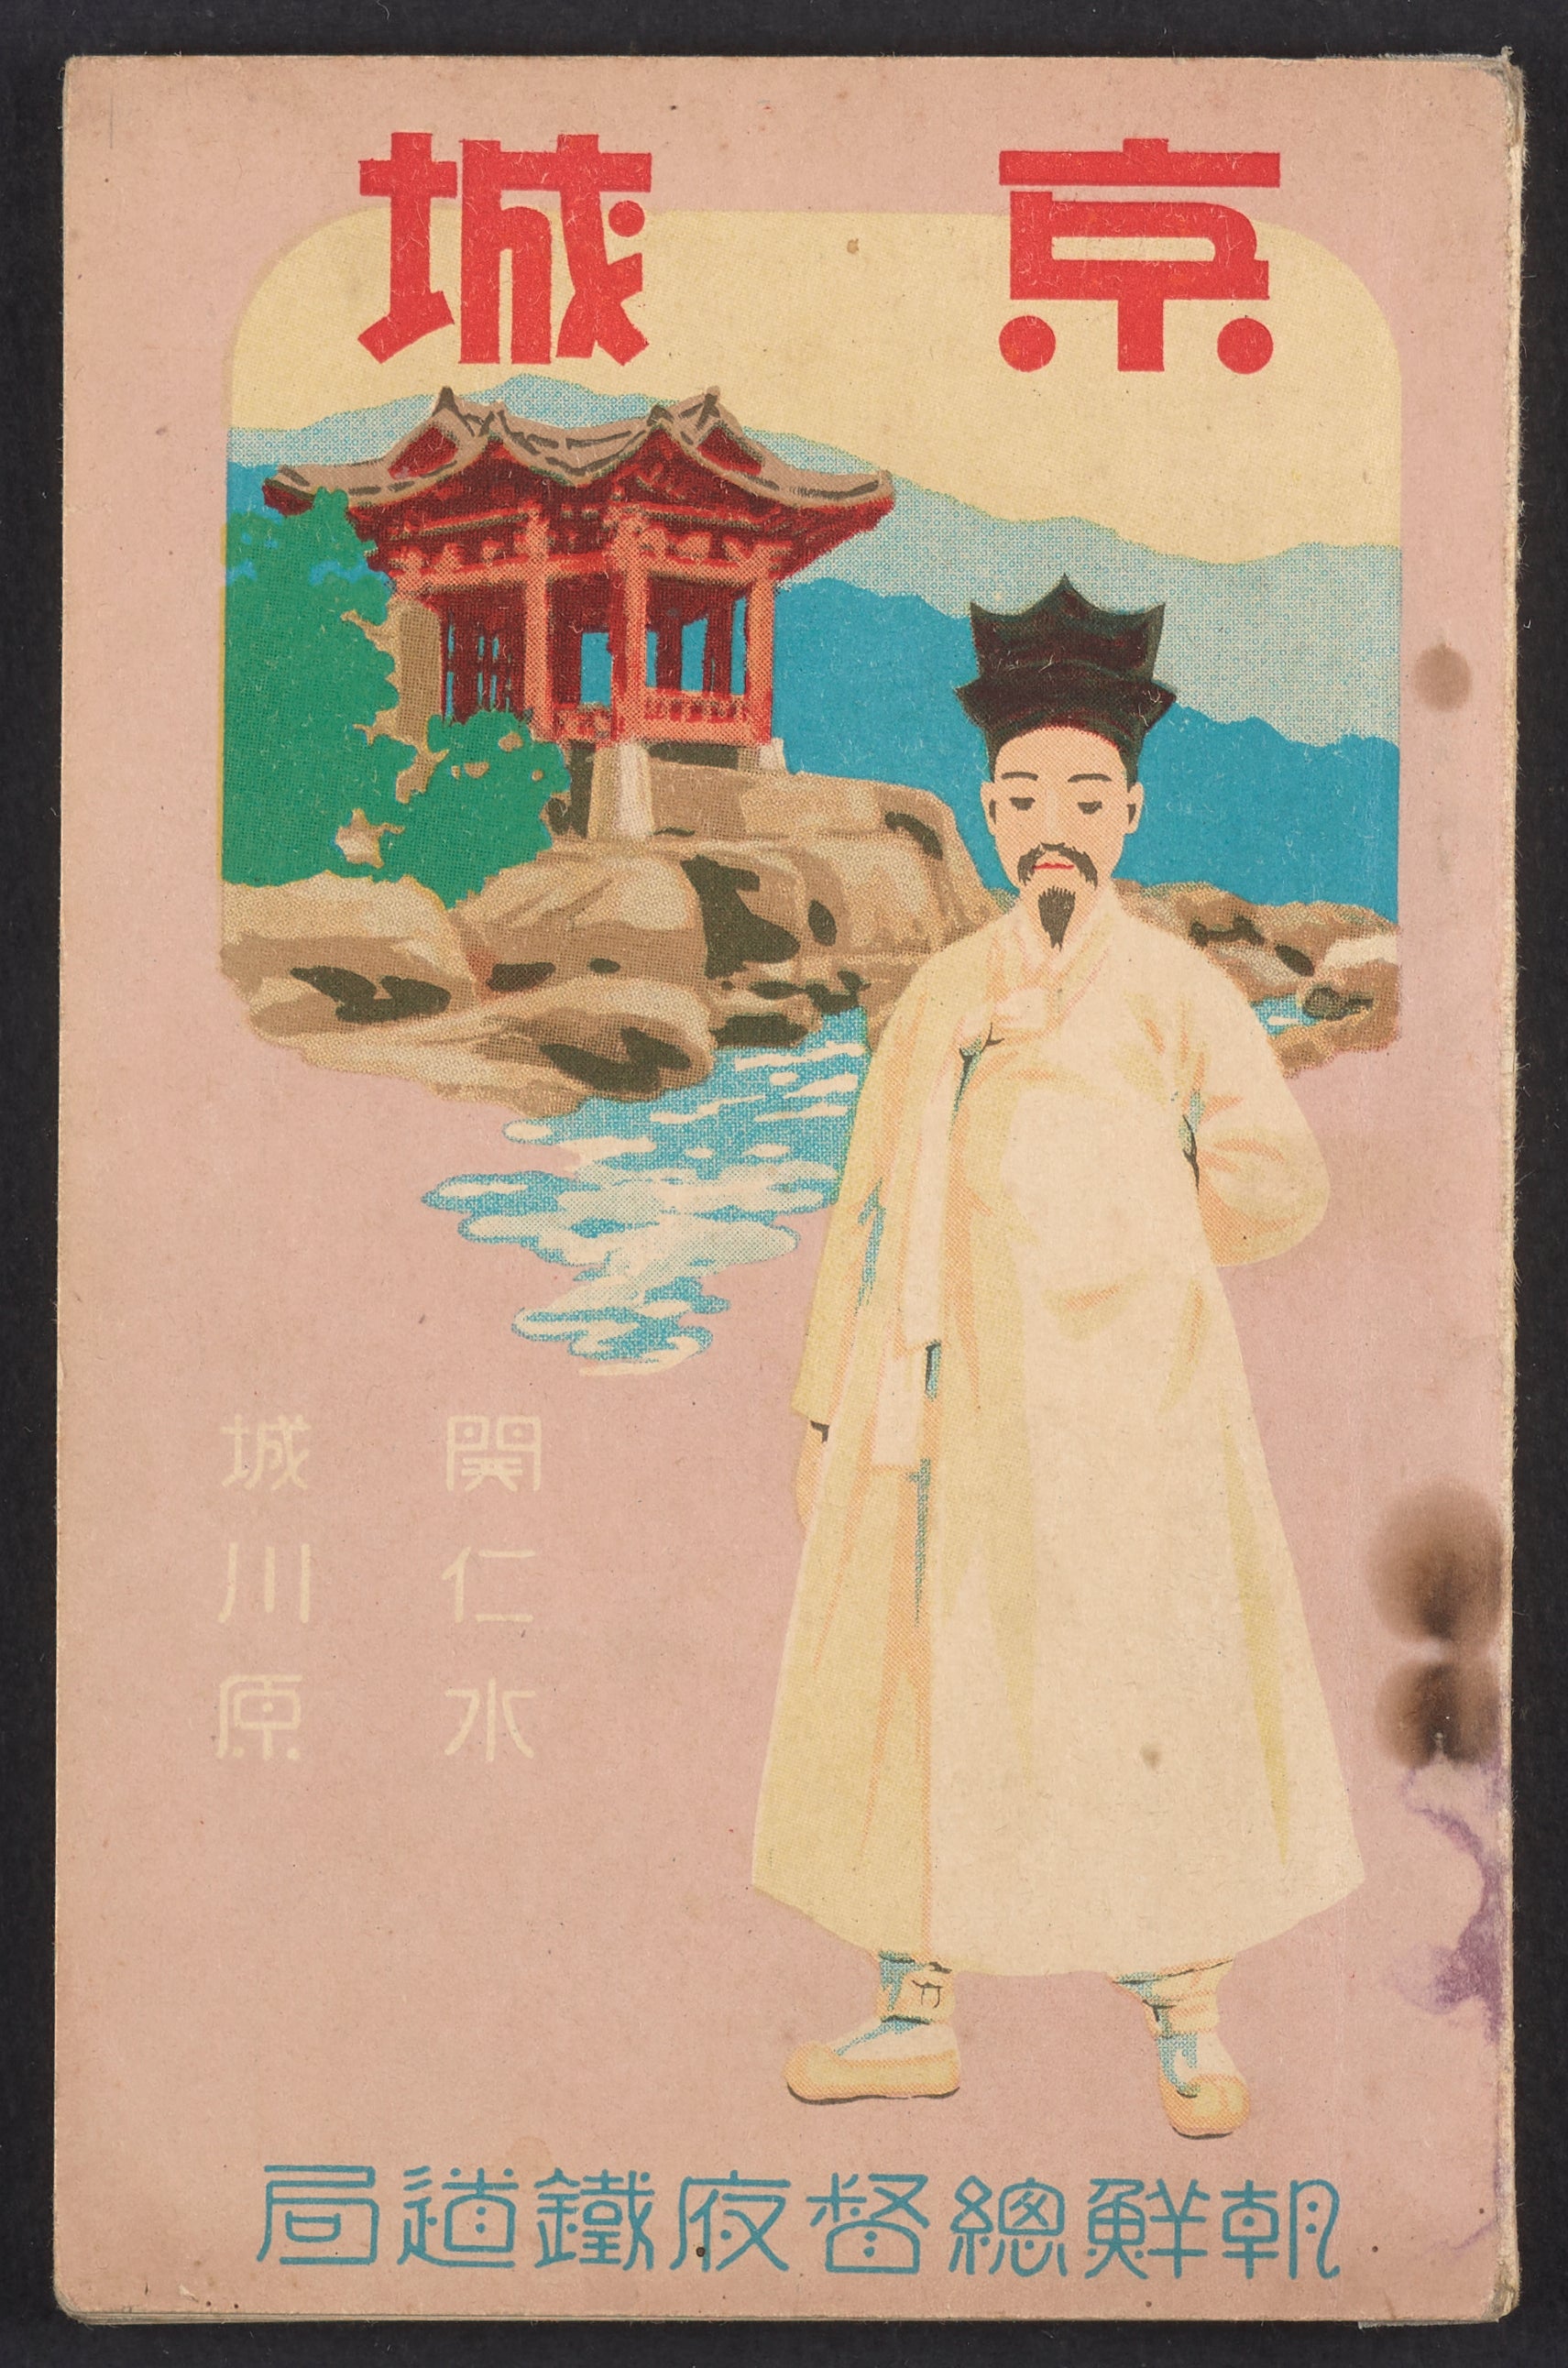 A book cover depicts a man in religious attire standing in front of a gazebo with mountains in the background.